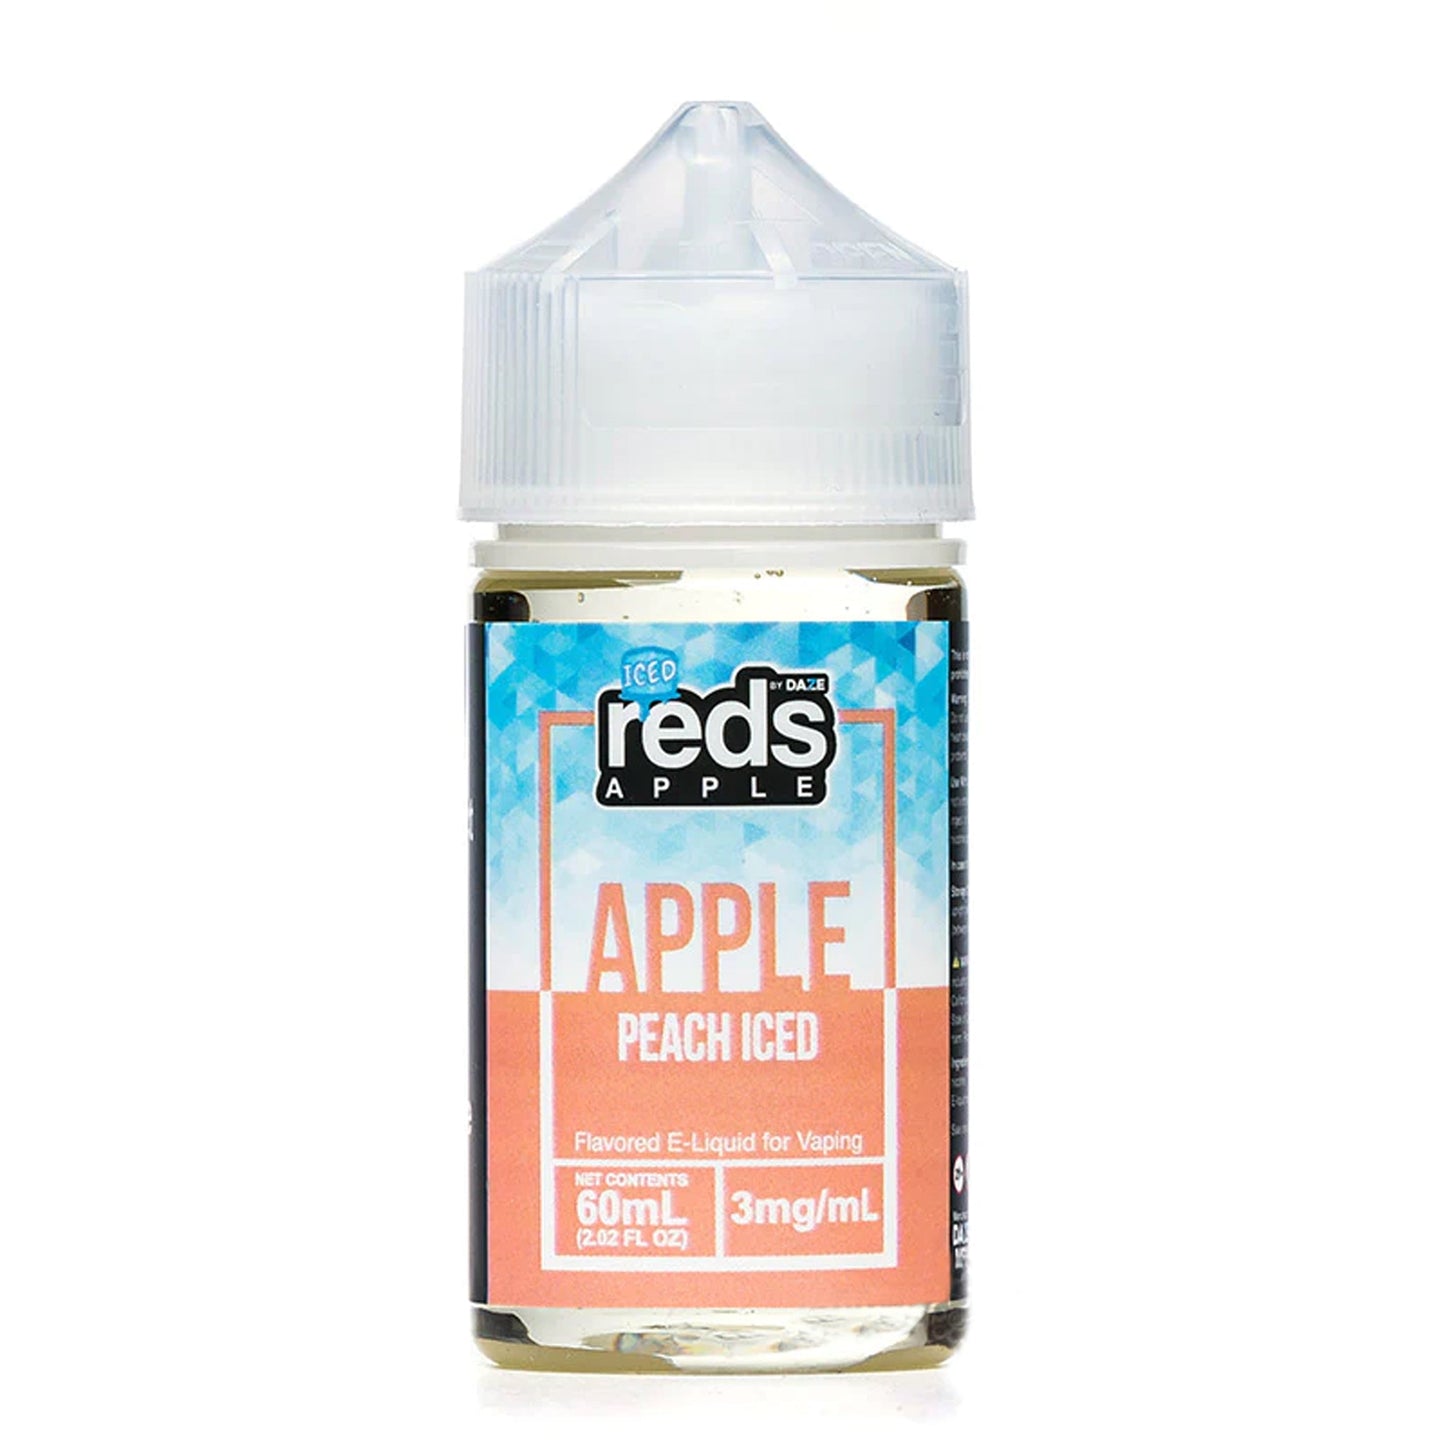 Load image into Gallery viewer, 7 Daze Reds Apple 60ML - Peach Apple Iced - Mobs Enterprise
